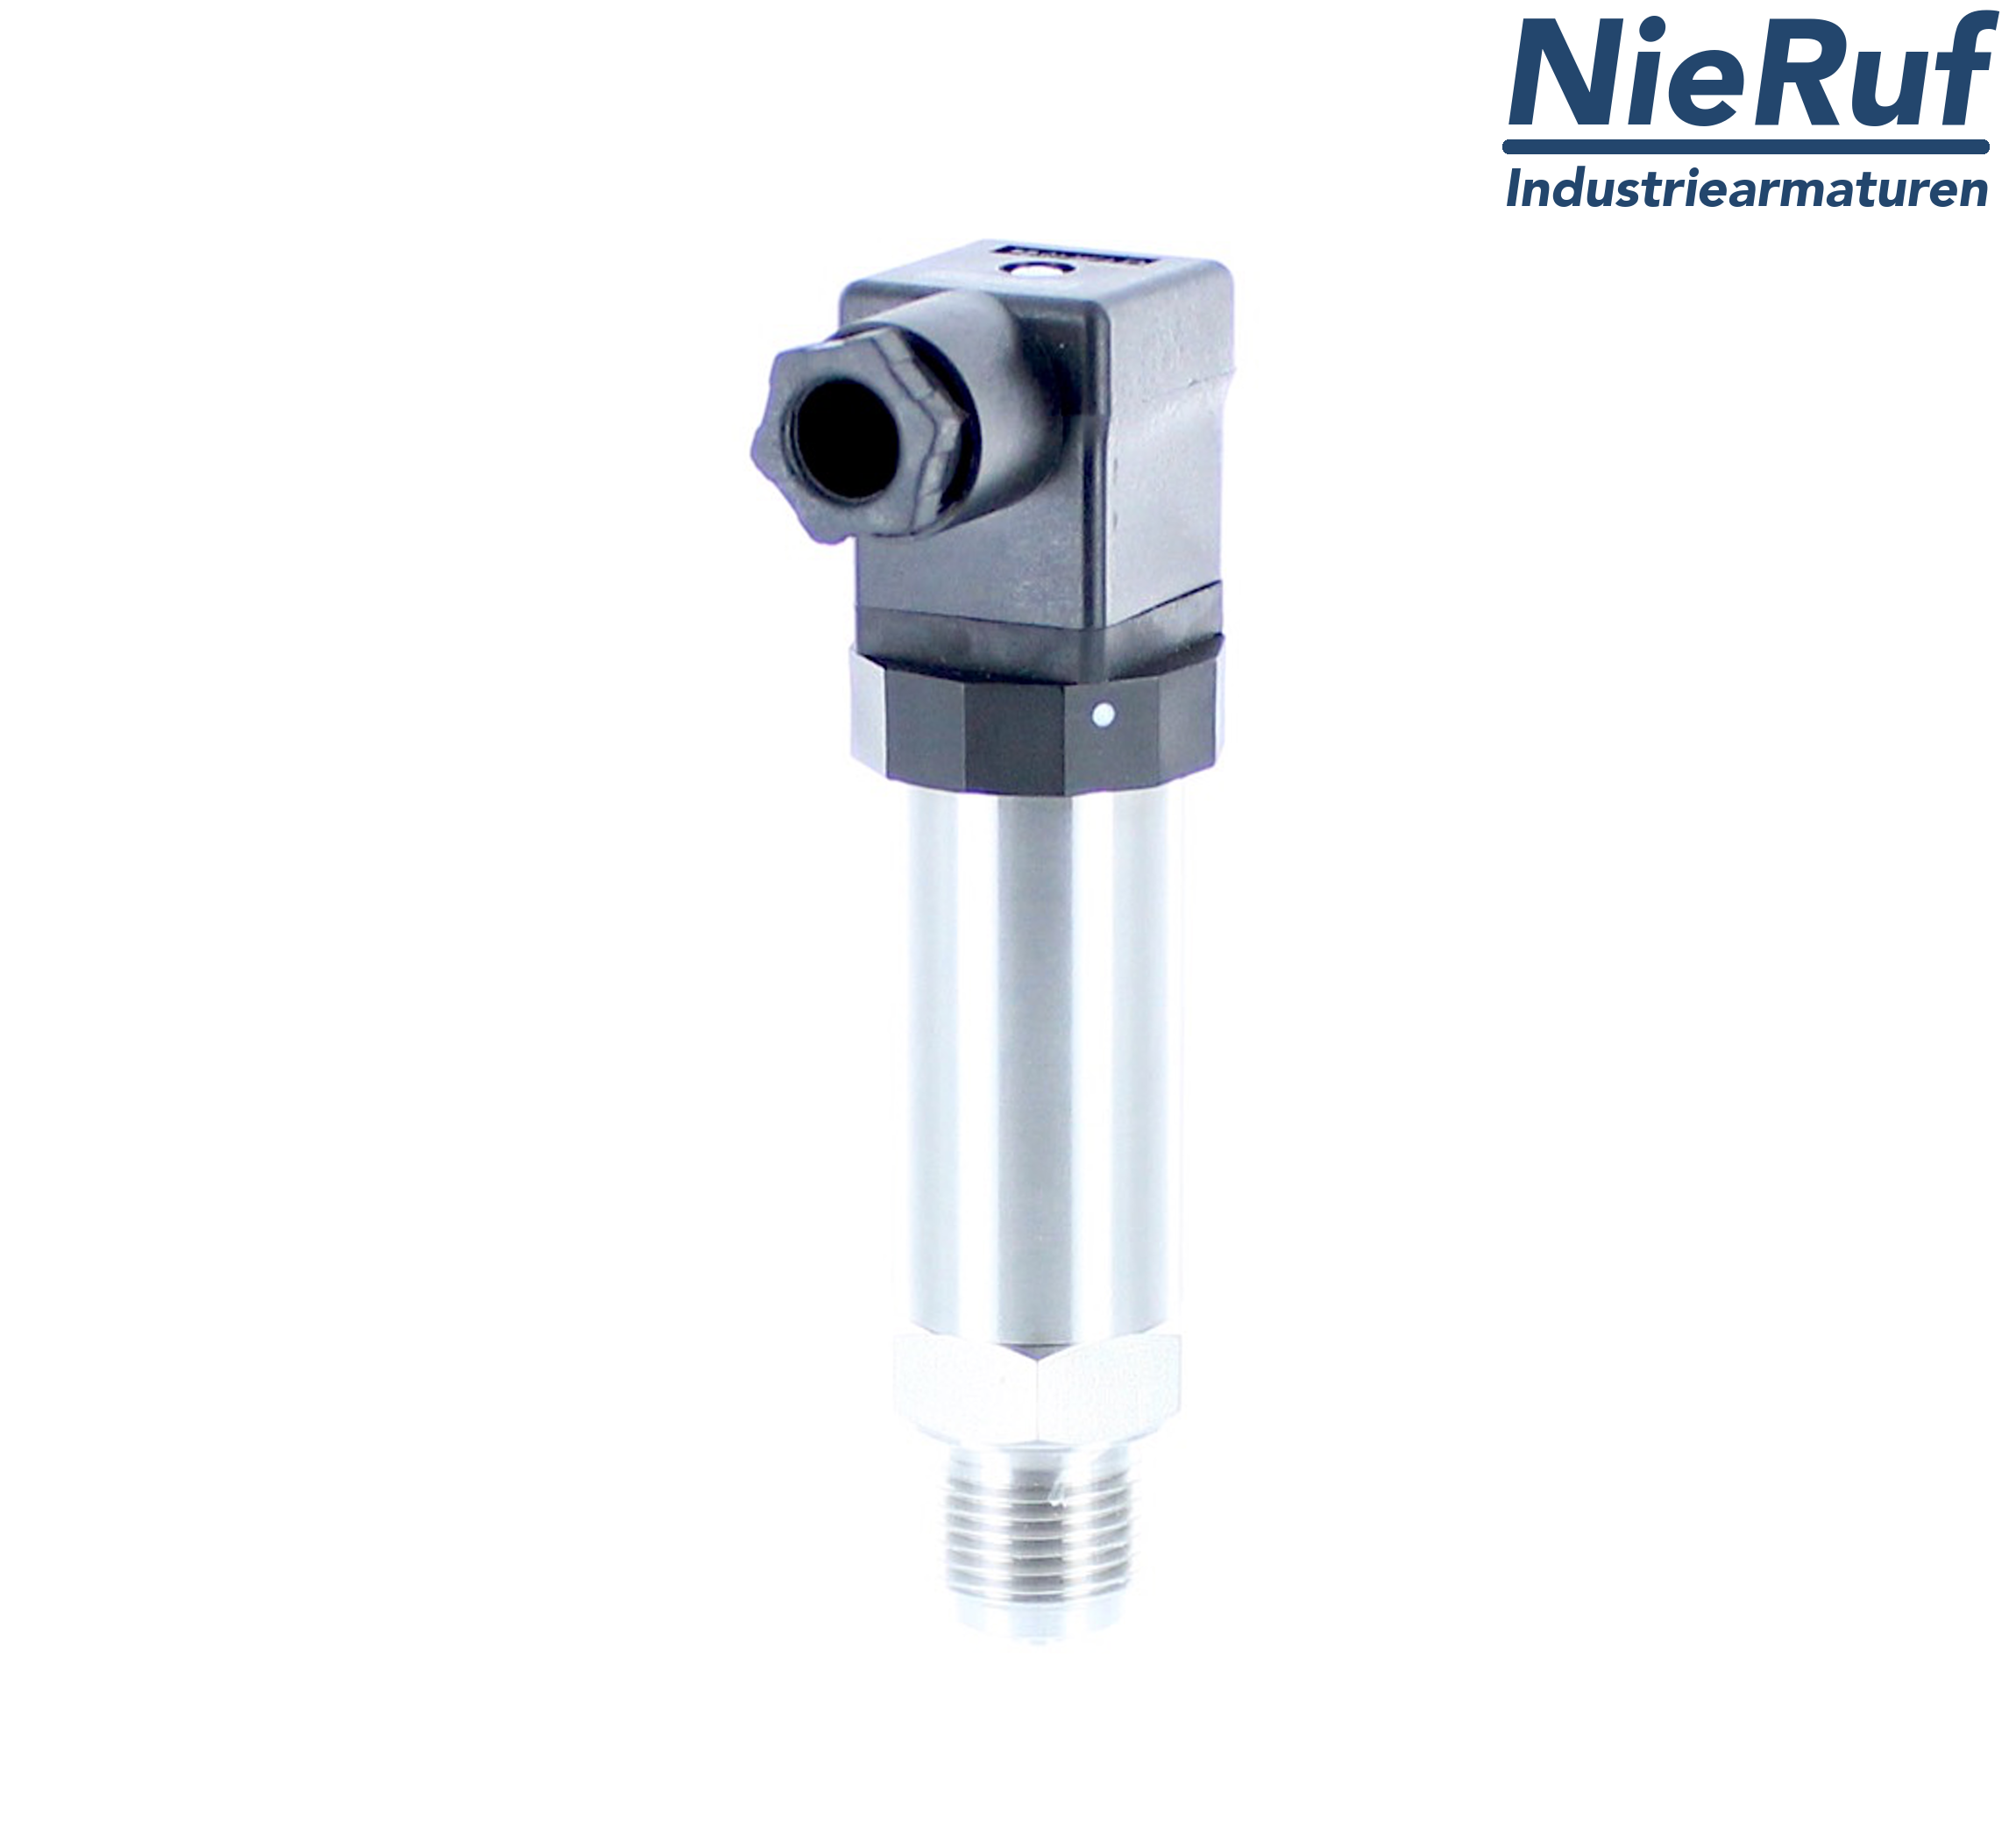 pressure sensor G 1/4" B DS01 stainless steel 2-wire: 4-20mA FPM 0,0 - 60,0 bar